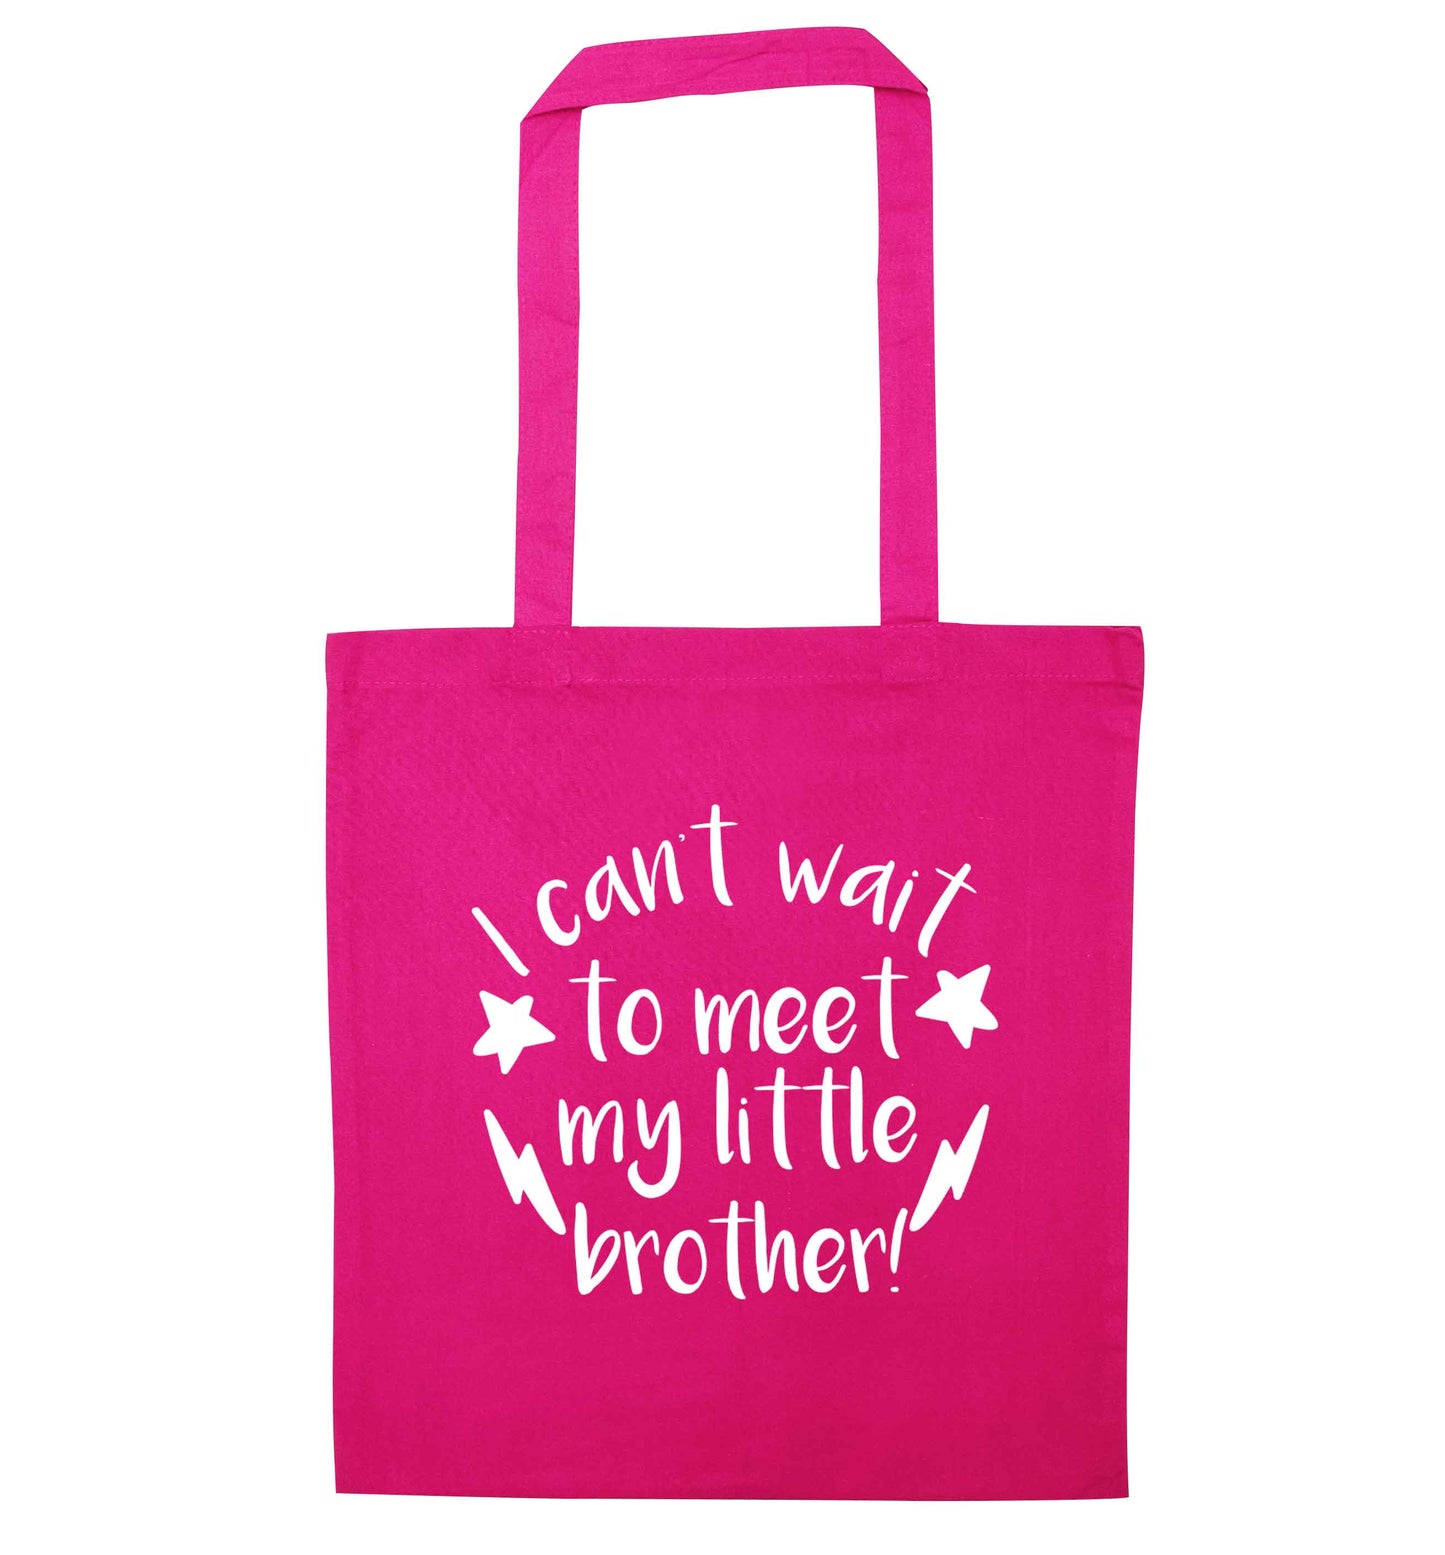 I can't wait to meet my sister! pink tote bag